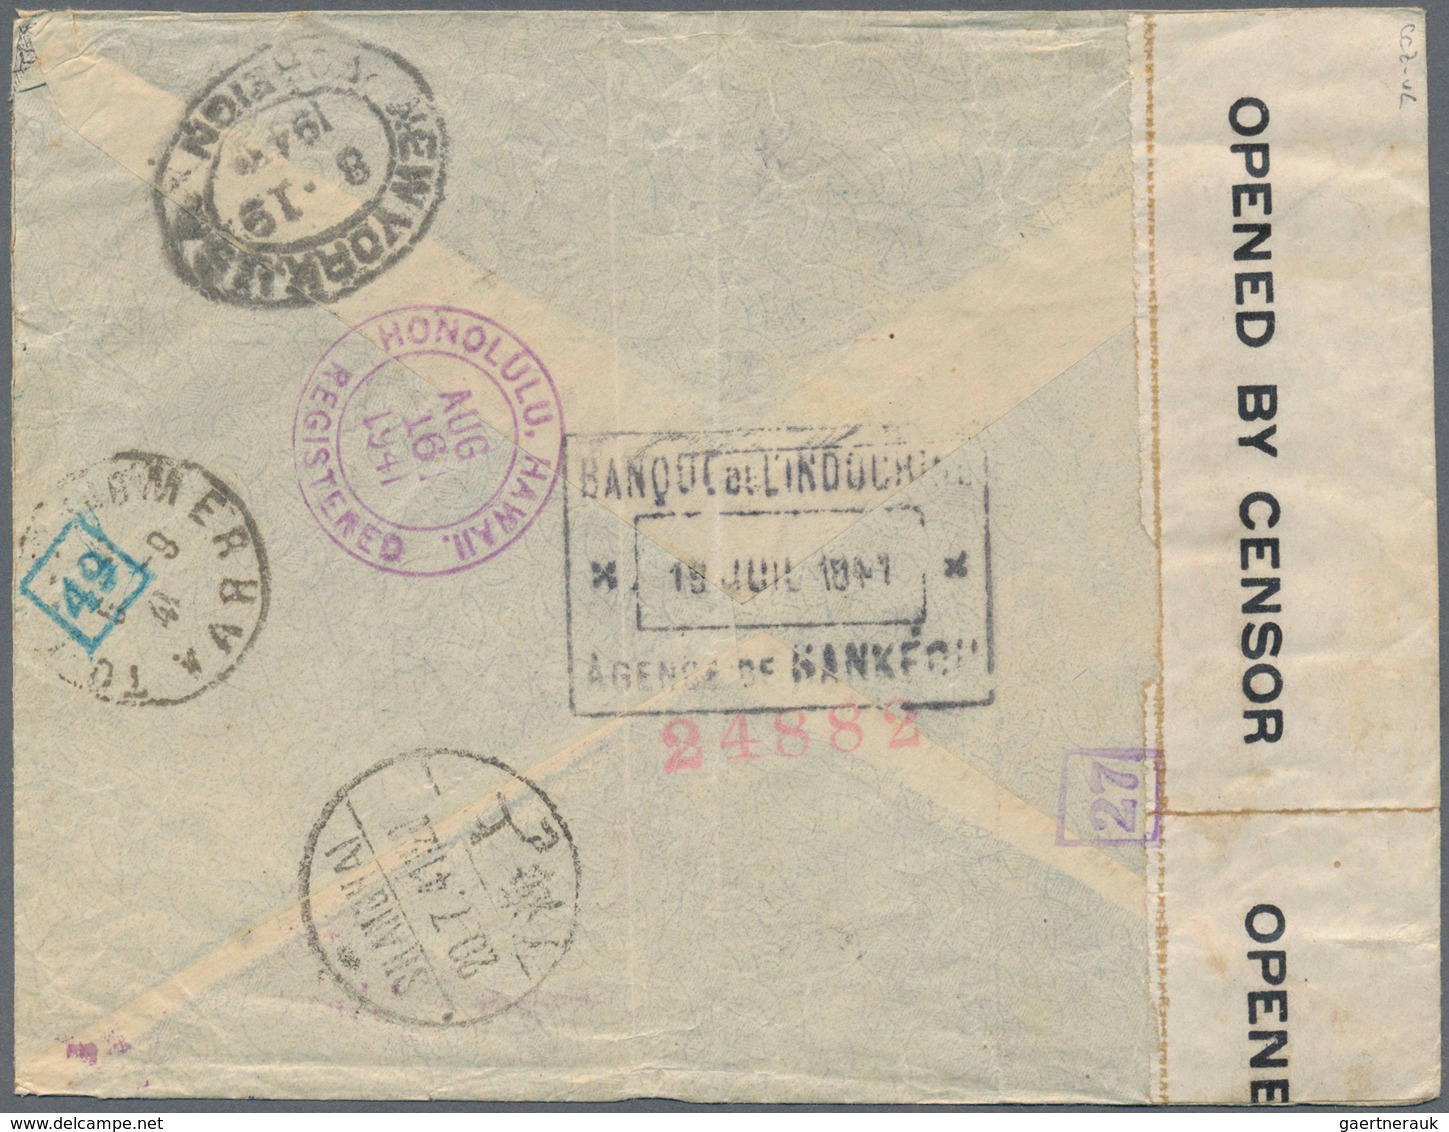 China: 1941, SYS $6.80 Franking Tied "HANKOW 19.7.41" To Registered Air Mail Cover To Toulon/France - 1912-1949 Republik